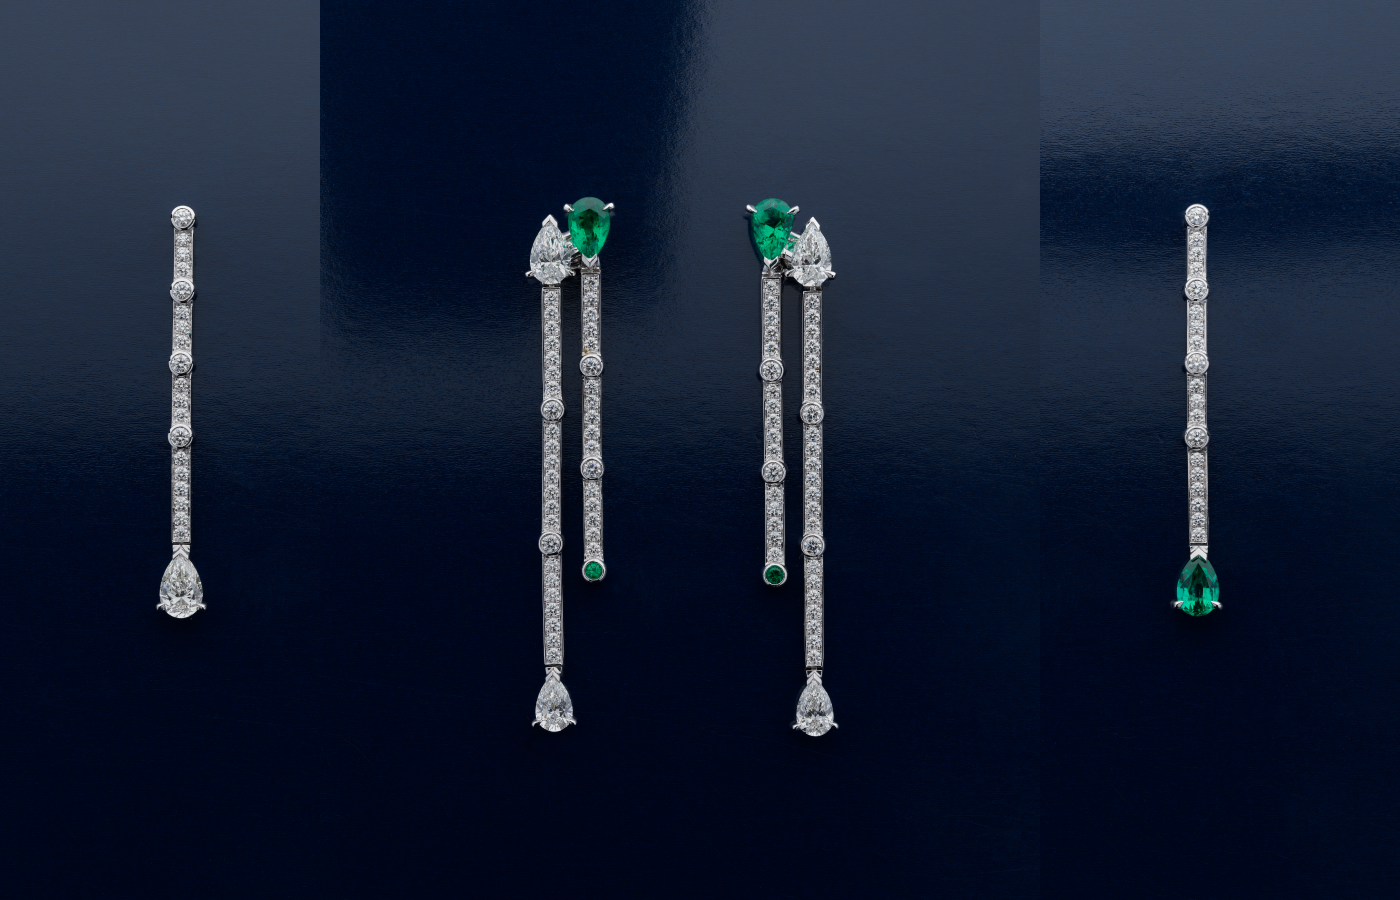 Repossi Serti Sur Vide earrings and transformable earrings in white gold, emerald and diamond from the 10 Year Anniversary collection